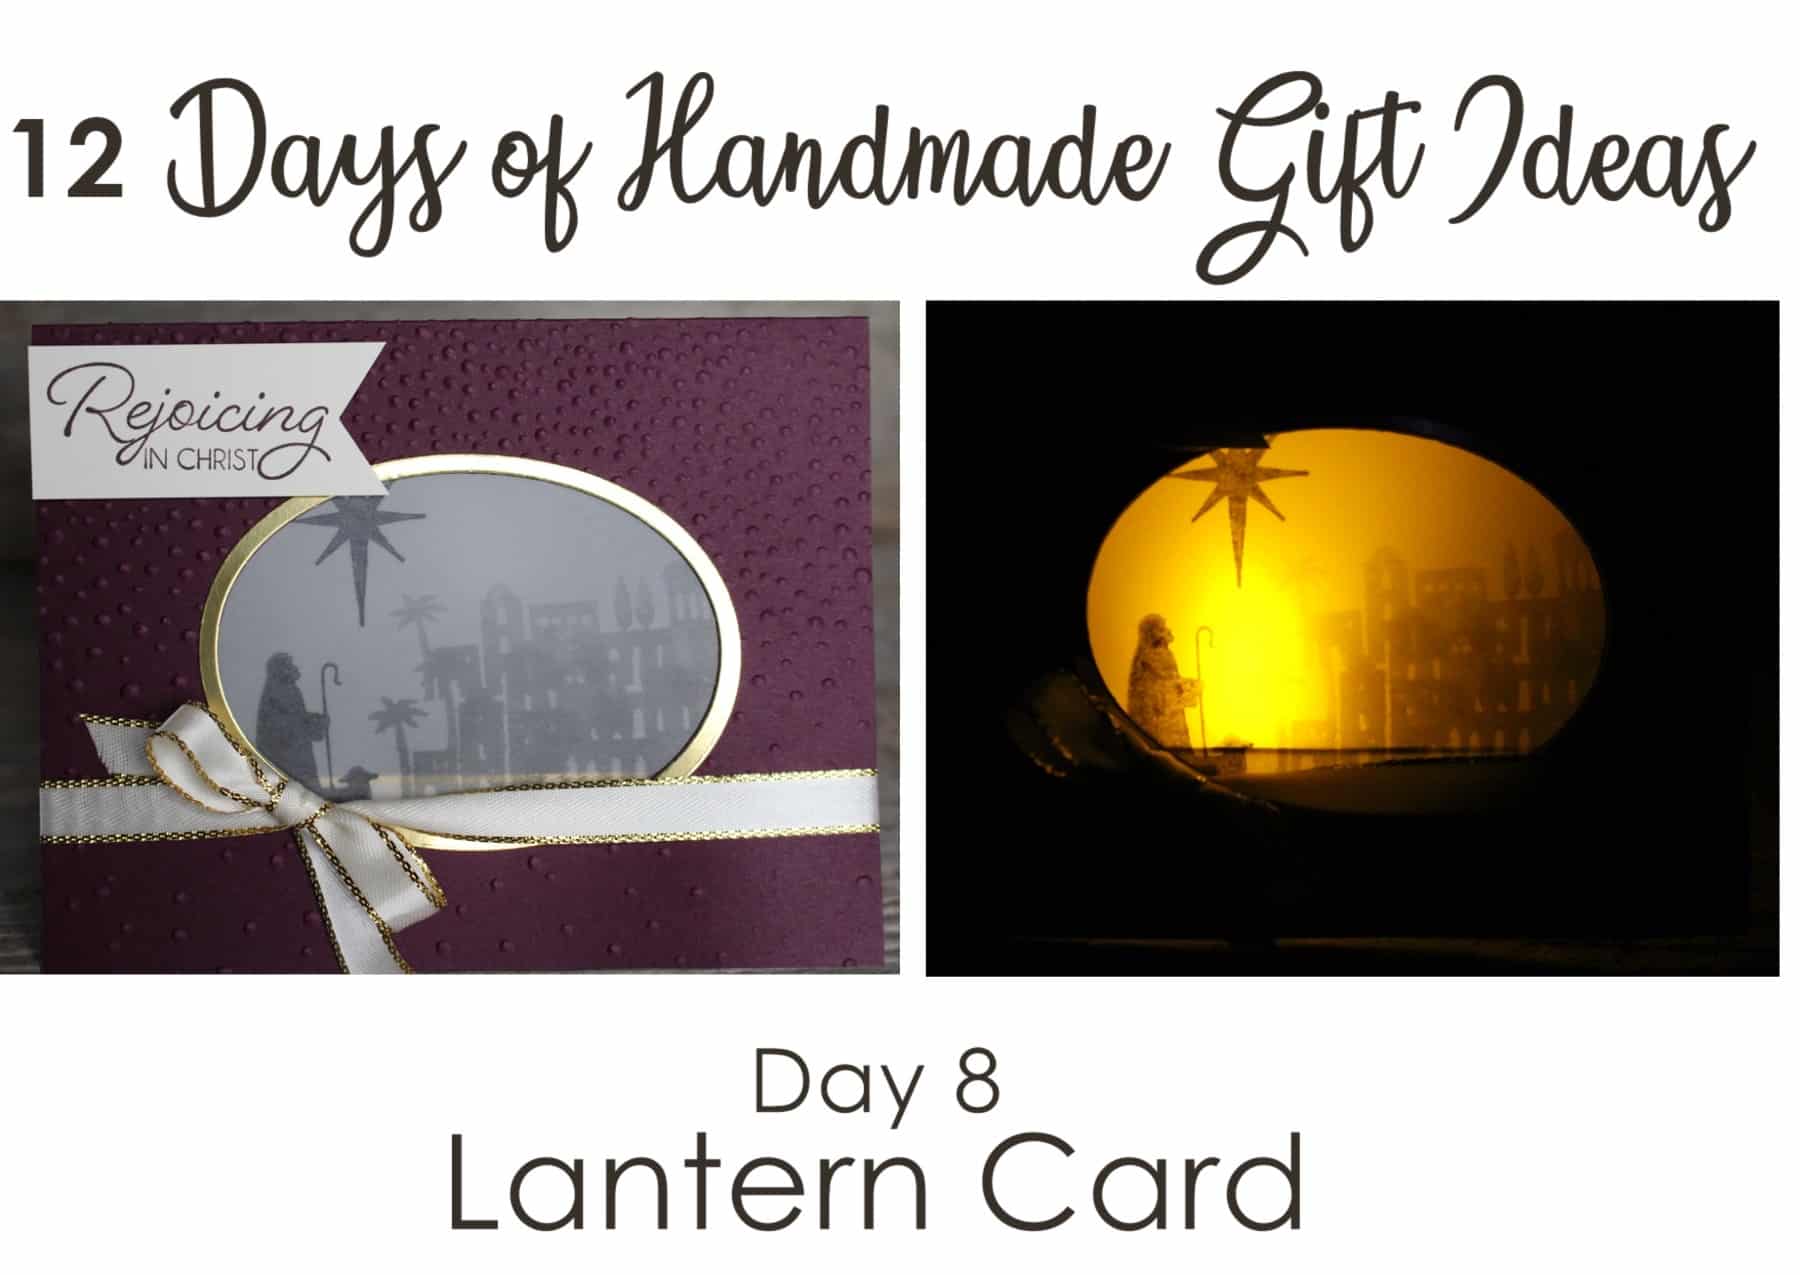 12 Days of Handmade Gift Ideas - Day 8 Lantern Card made with the Stampin' Up! Night in Bethlehem tamp set